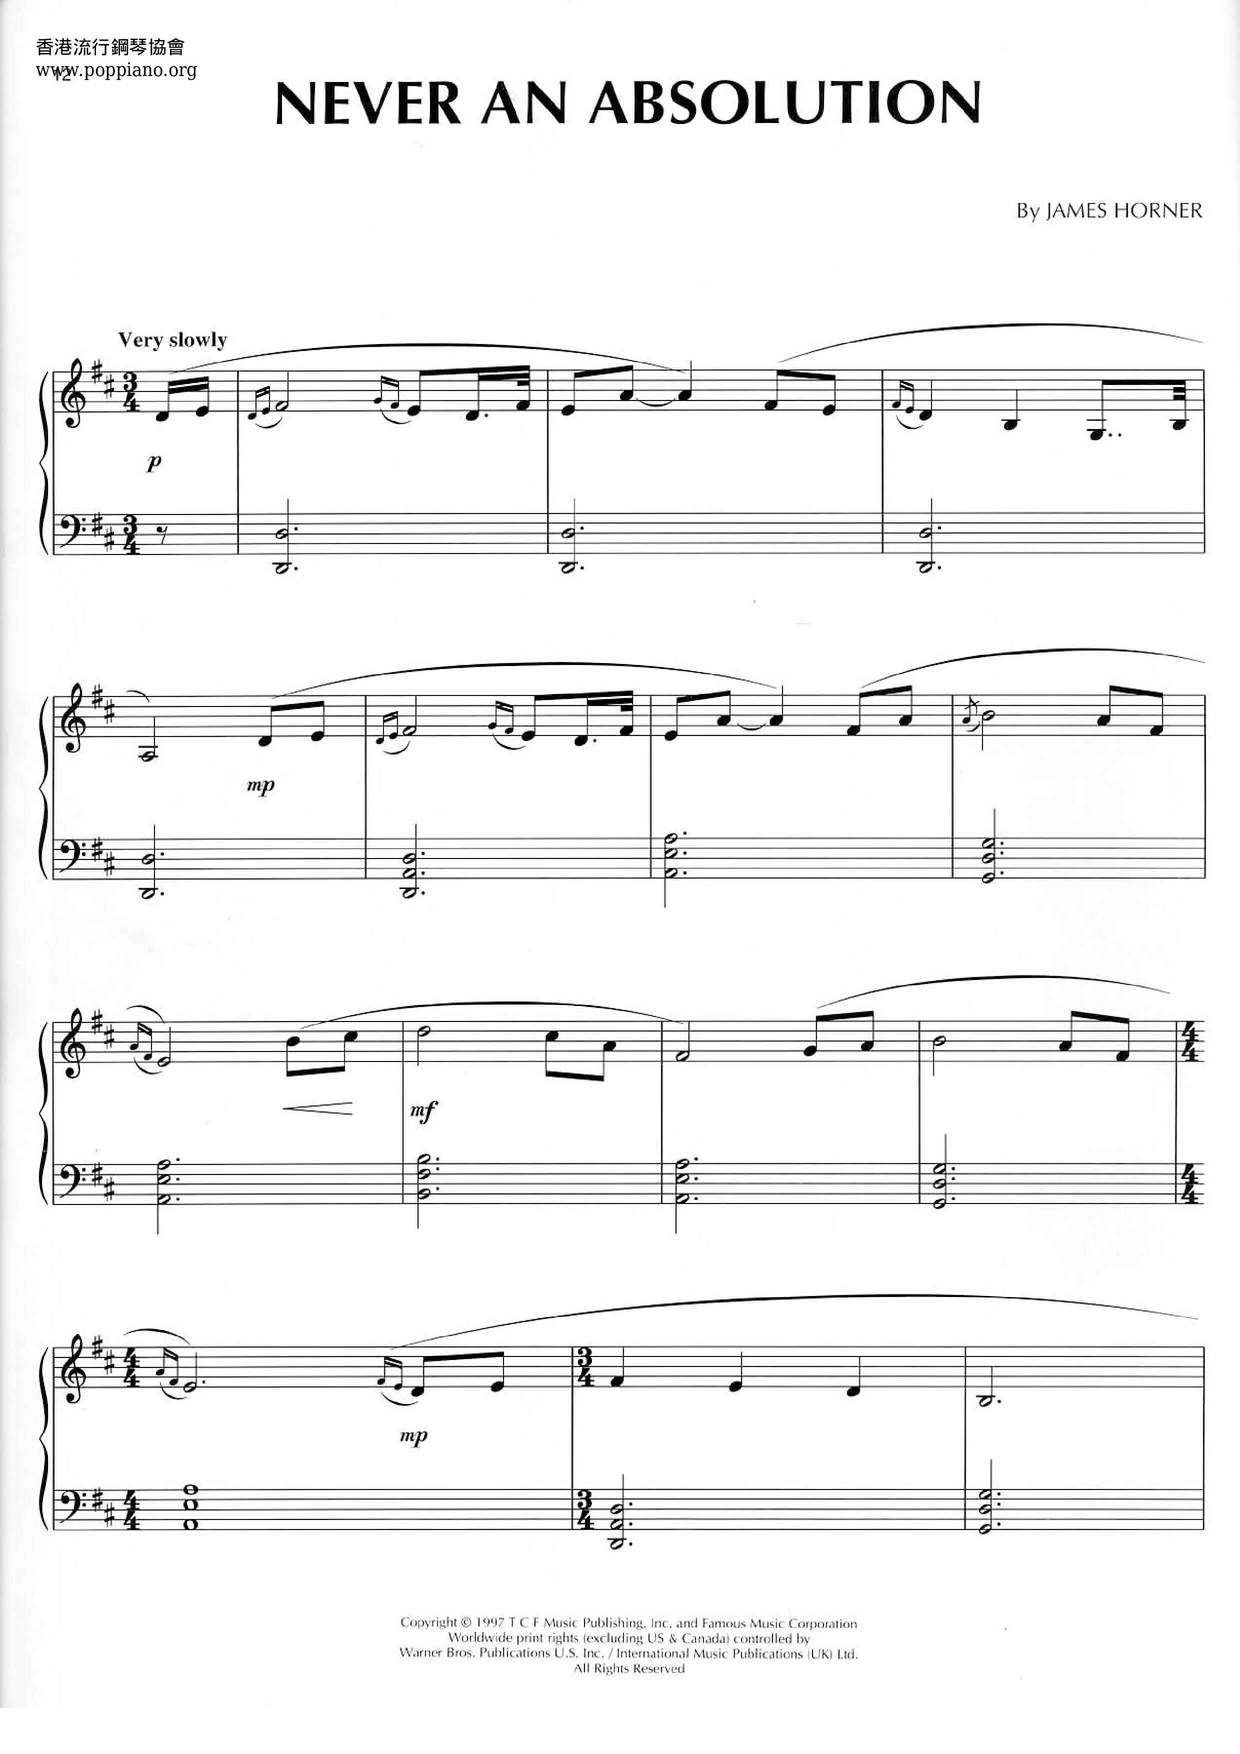 Titanic Songbook 44 Pages琴譜